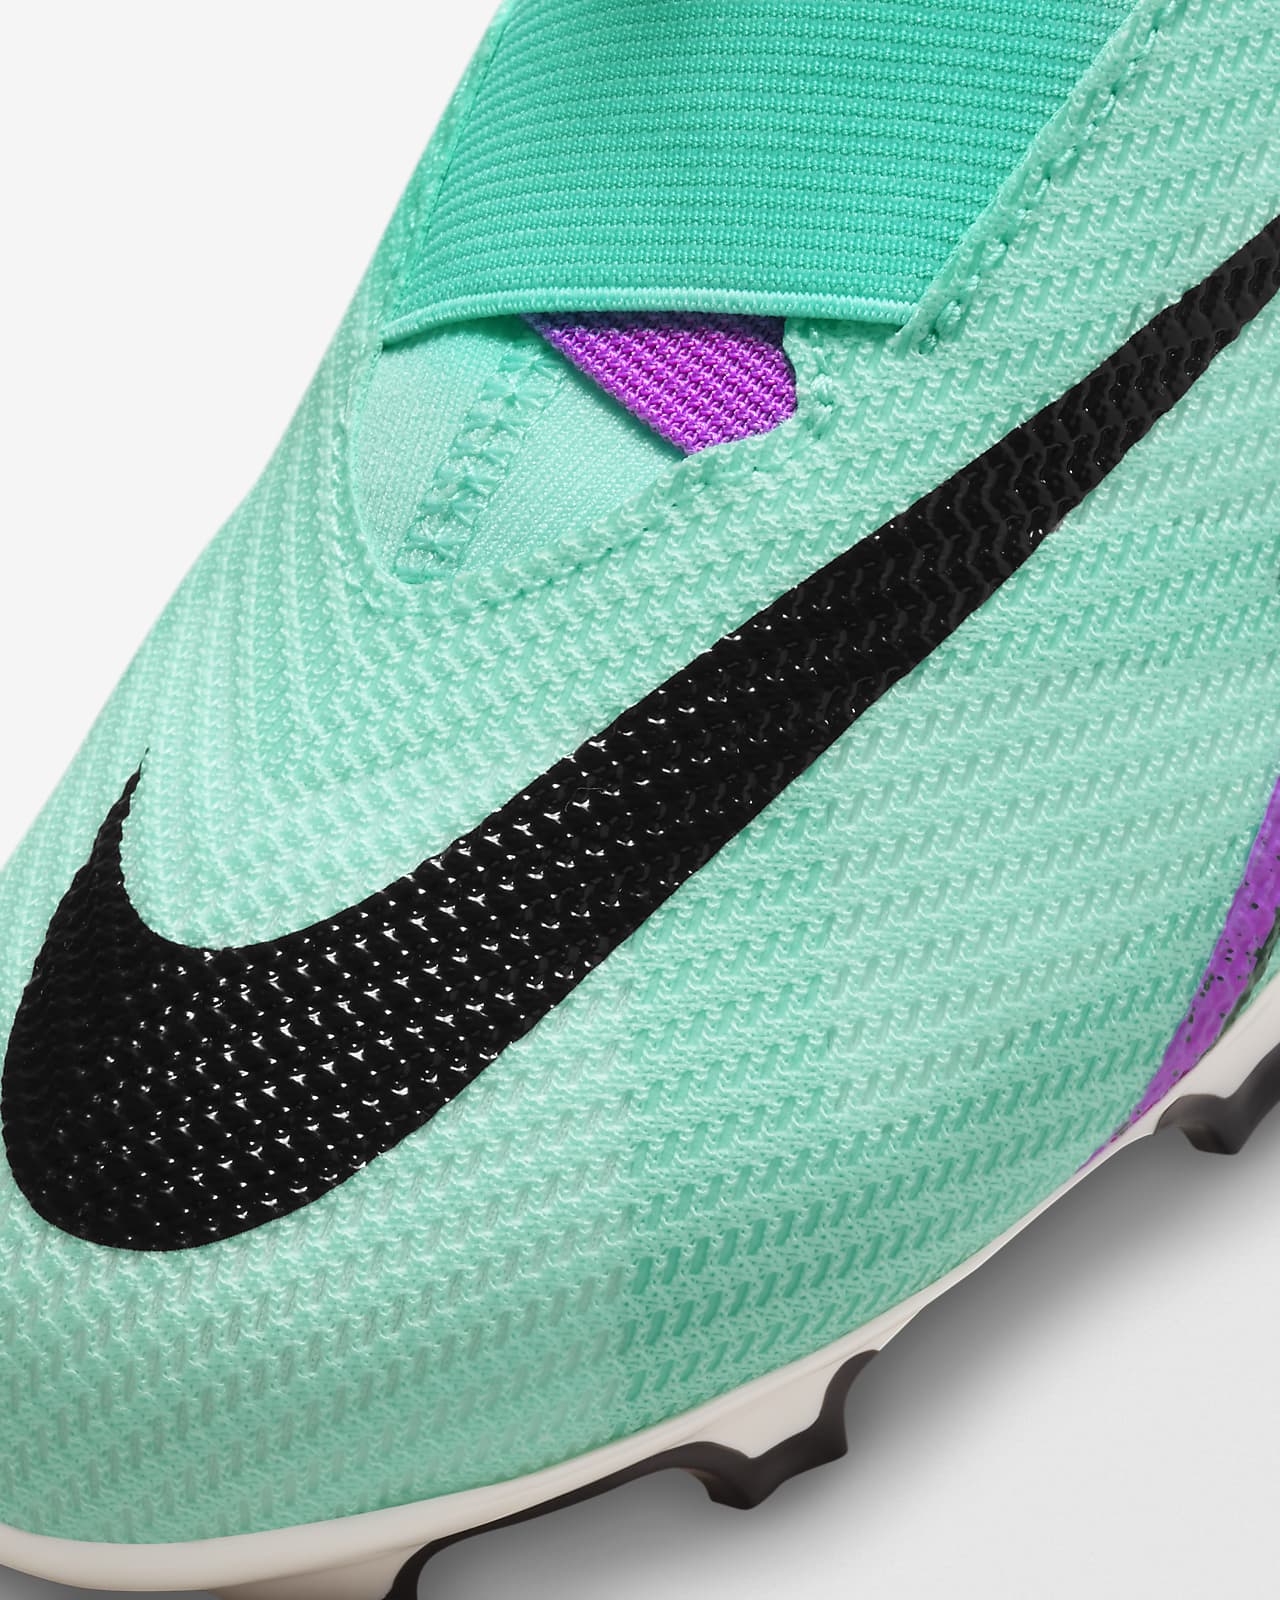 Nike Soccer Cleats & Shoes for Men, Women and Kids